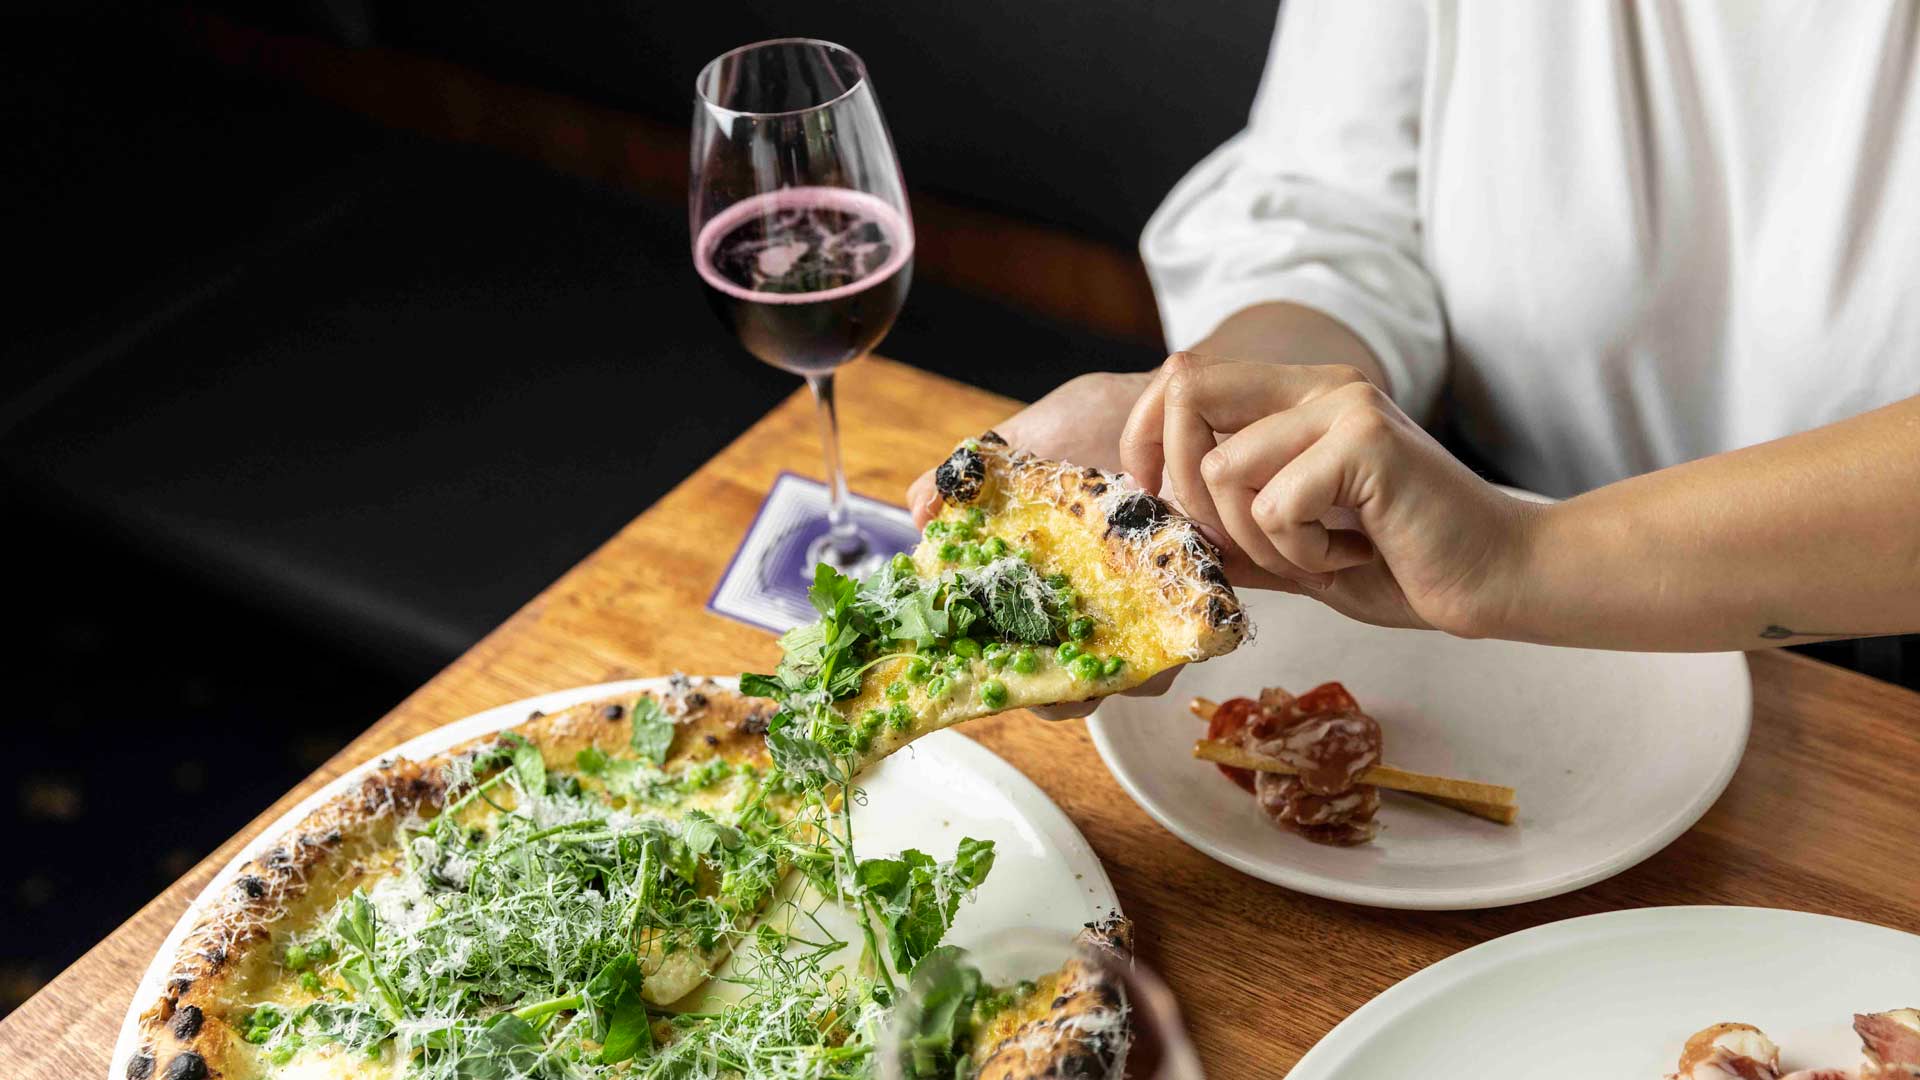 Dom's Social Club Is the New Three-Level Pizzeria, Pool Room and Rooftop Bar in Melbourne's CBD